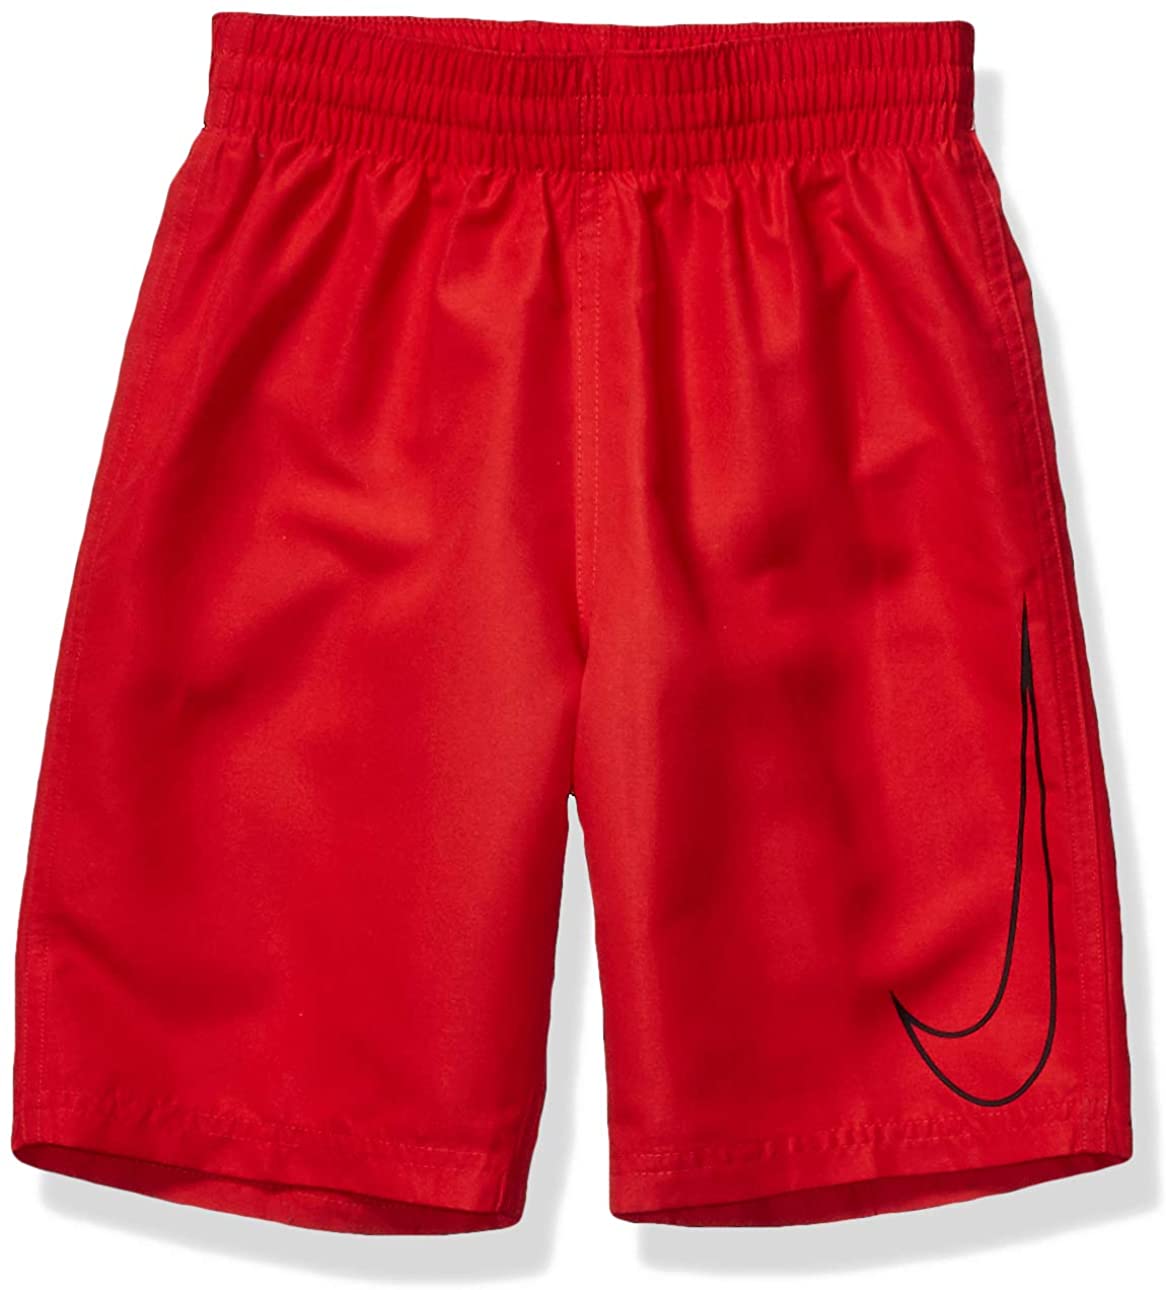 Boy's Nike Big Swoosh Solid Lap Volley Short Swim Trunk in University Red color from the front